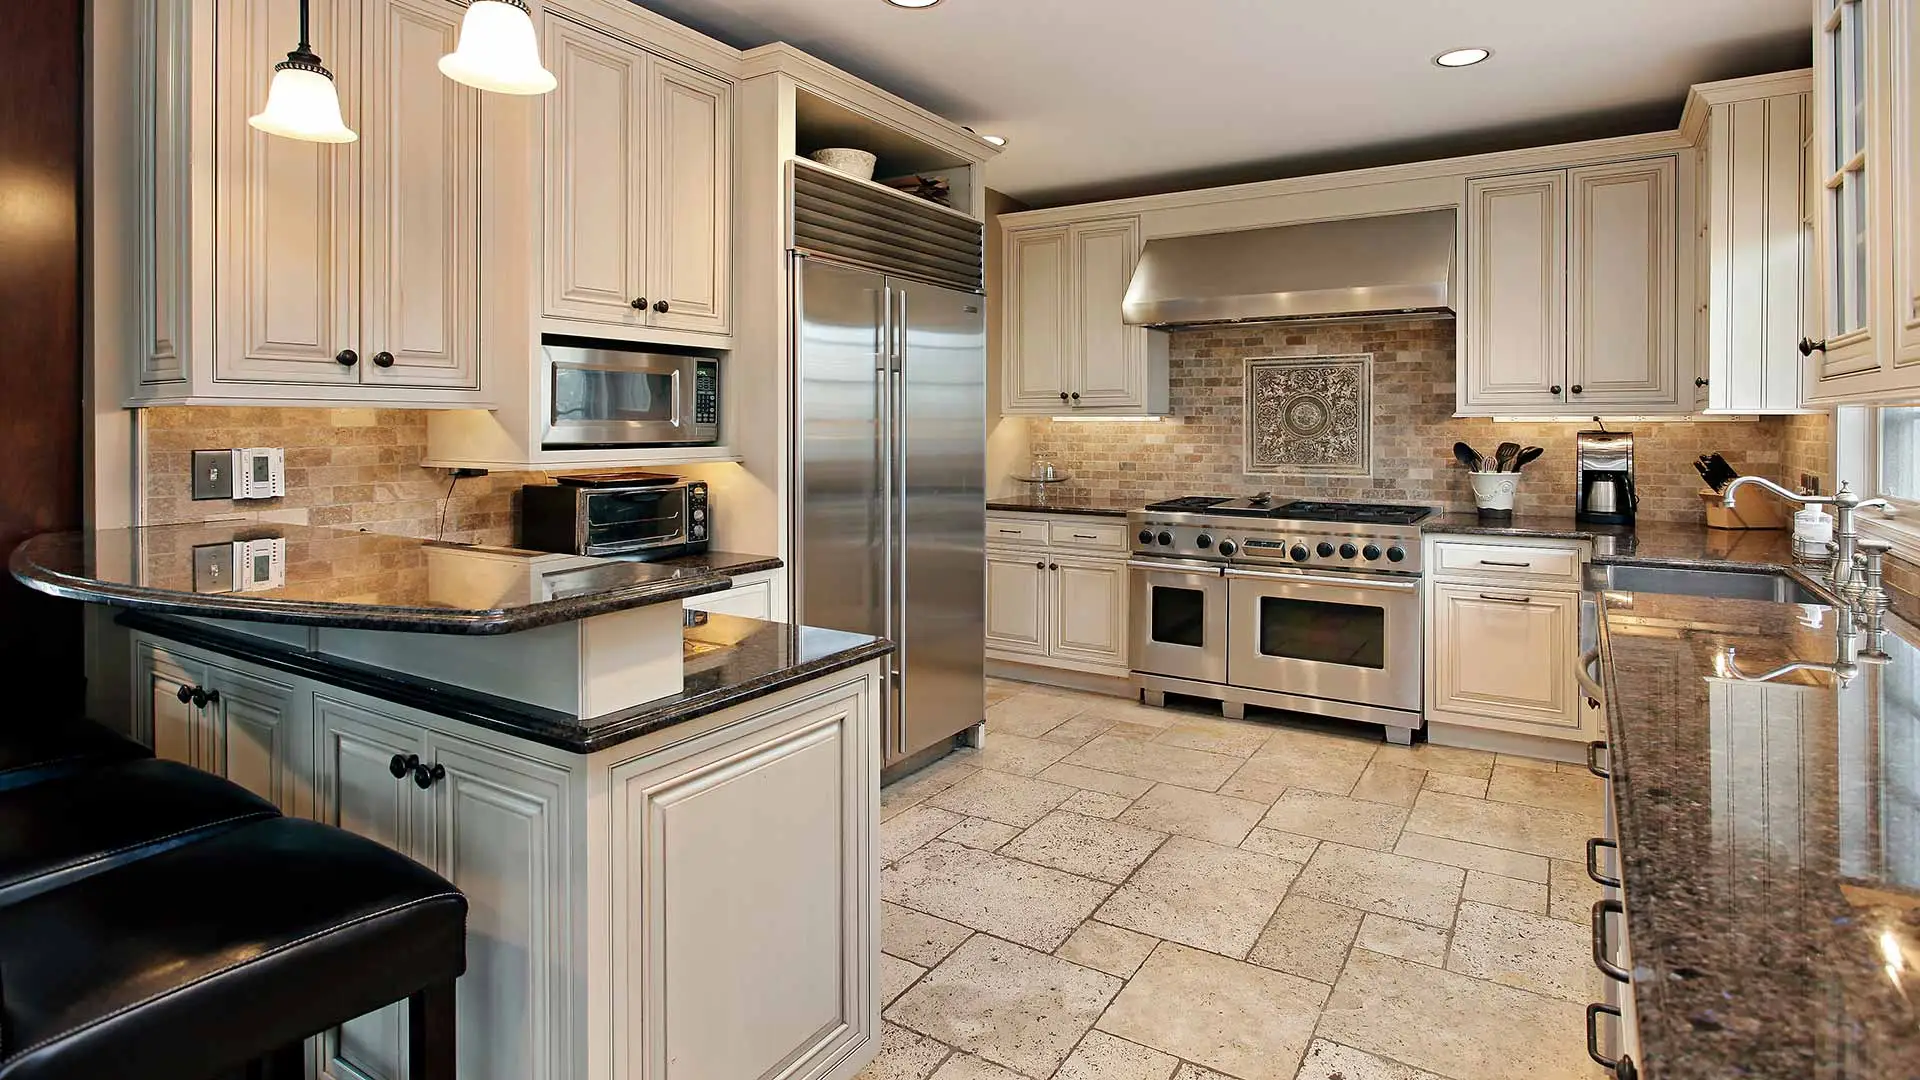 Our Most Popular Flooring Options for Your Next Kitchen Remodel